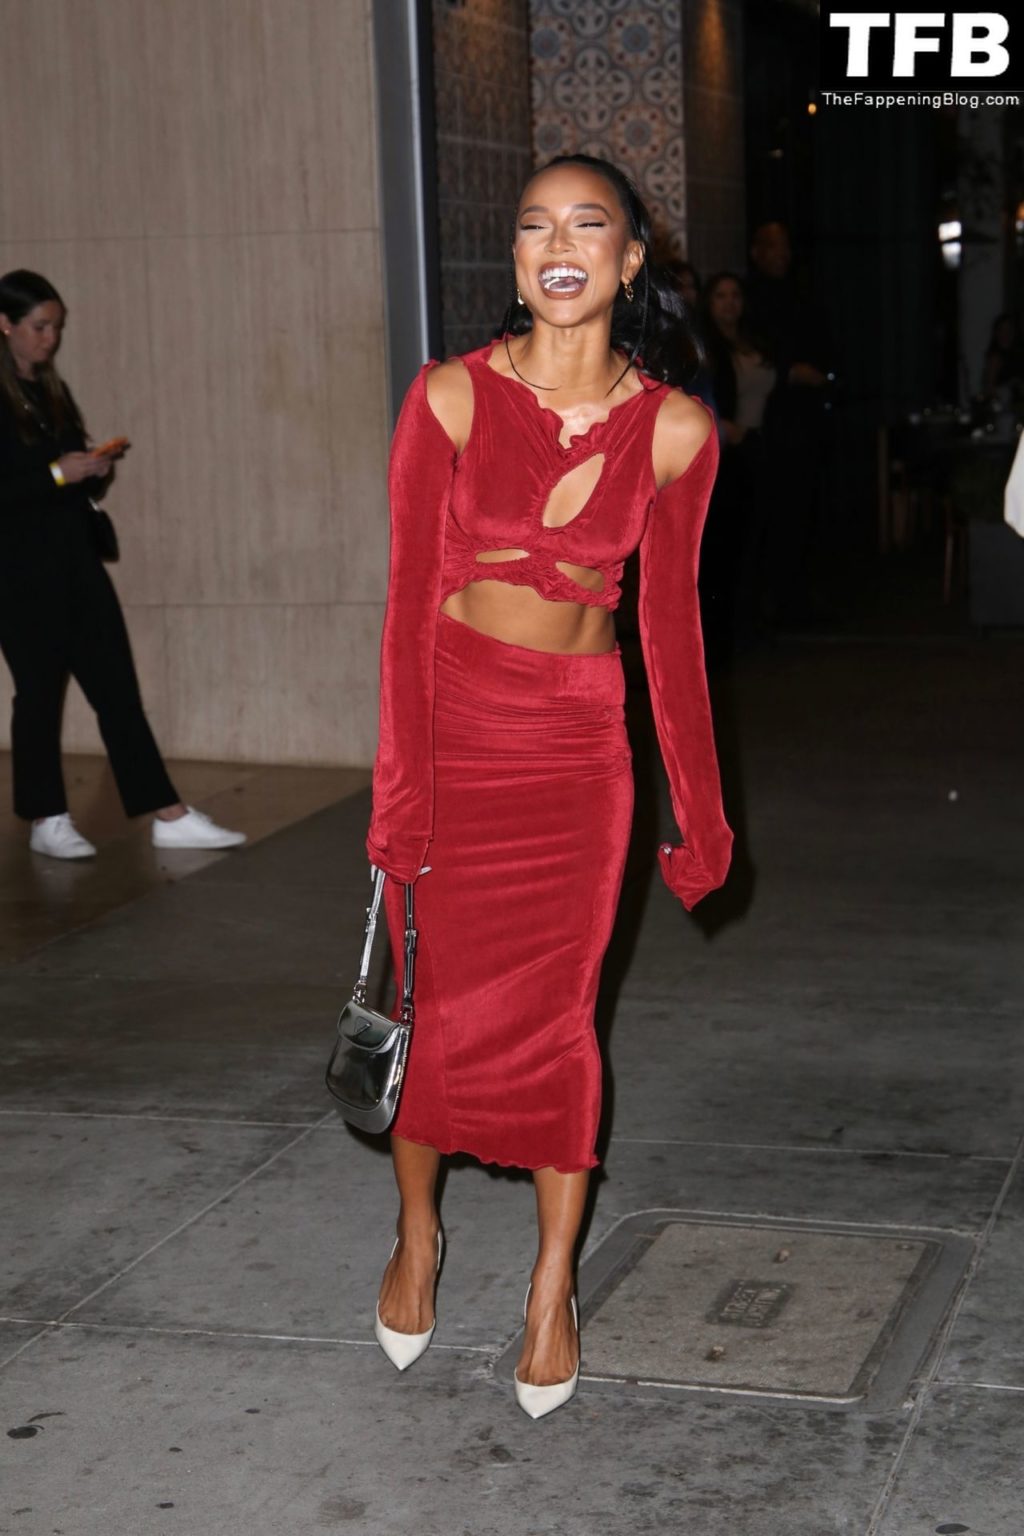 Karrueche Tran Sexy The Fappening Blog 35 1024x1536 - Karrueche Tran Shows Her Pokies in a Red Dress at The Hollywood Reporter’s Oscar Nominees Night (68 Photos)